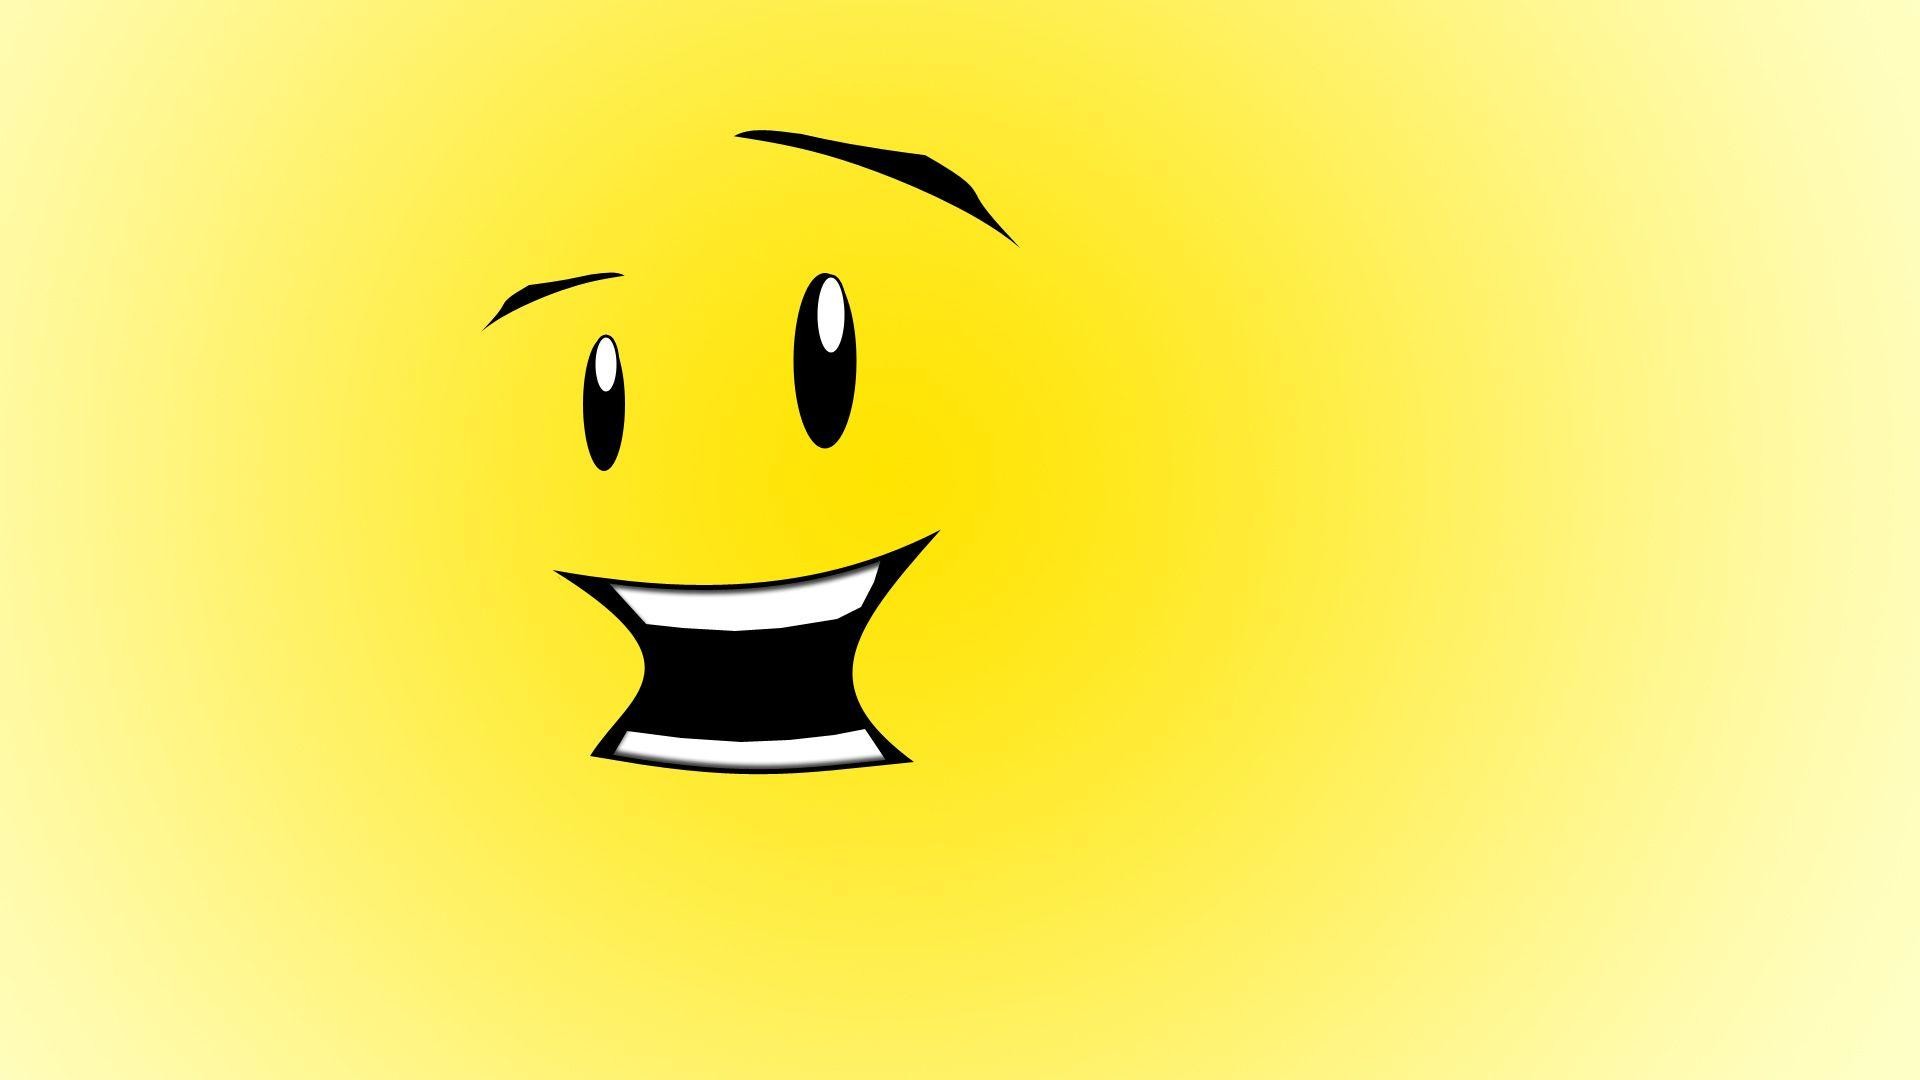 1920x1080 ... colorful images | This is the colorful smiley faces colorful .